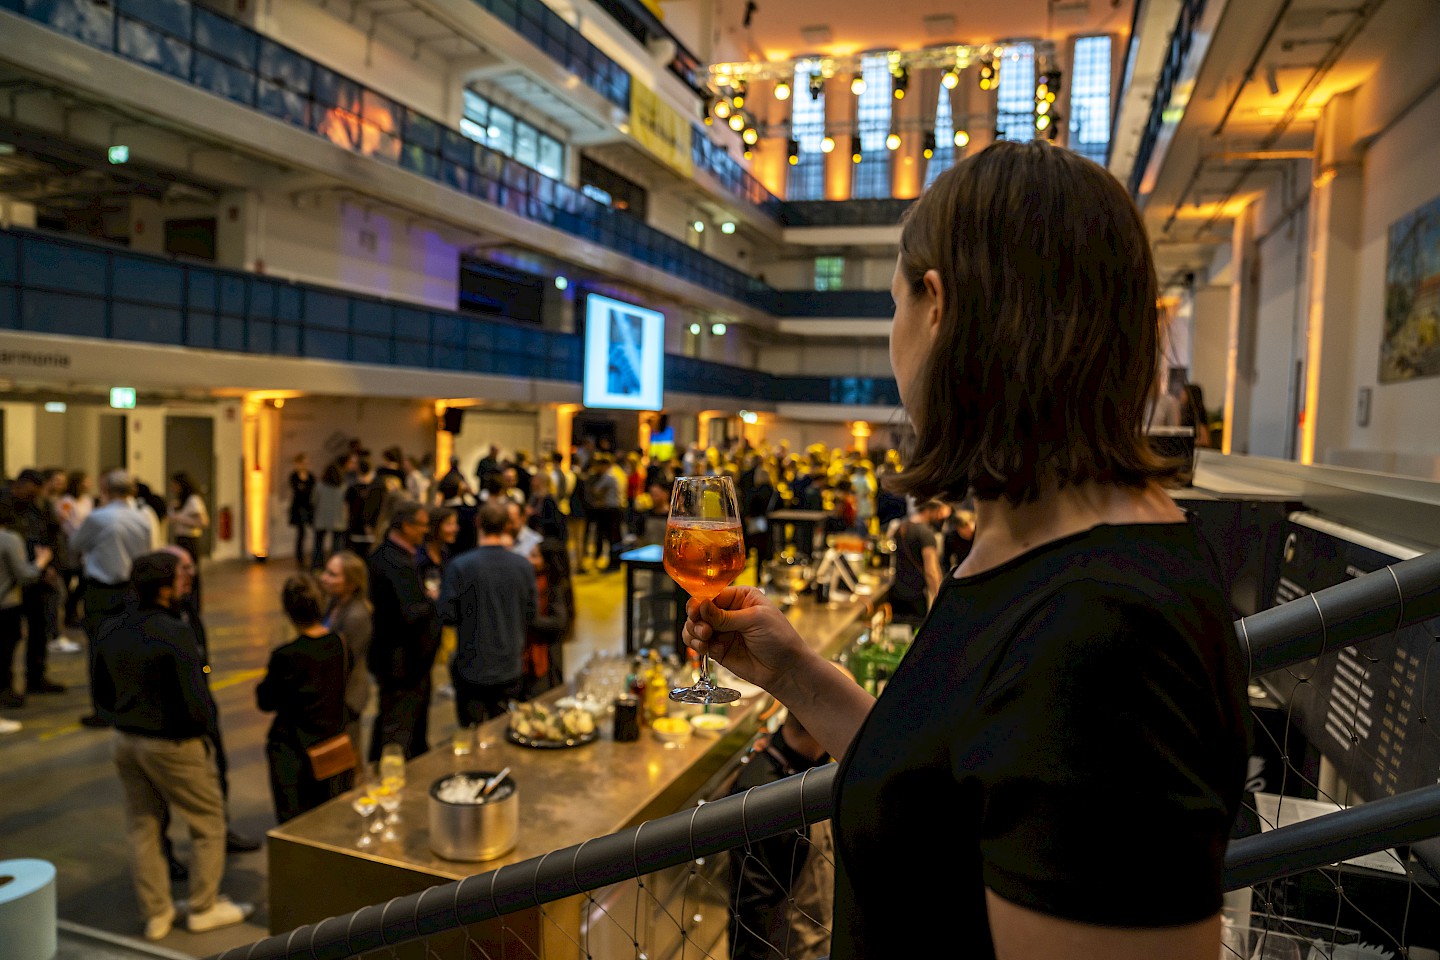 In the foreground, a woman with drink in hand, looking at a reception in the hall in the background.